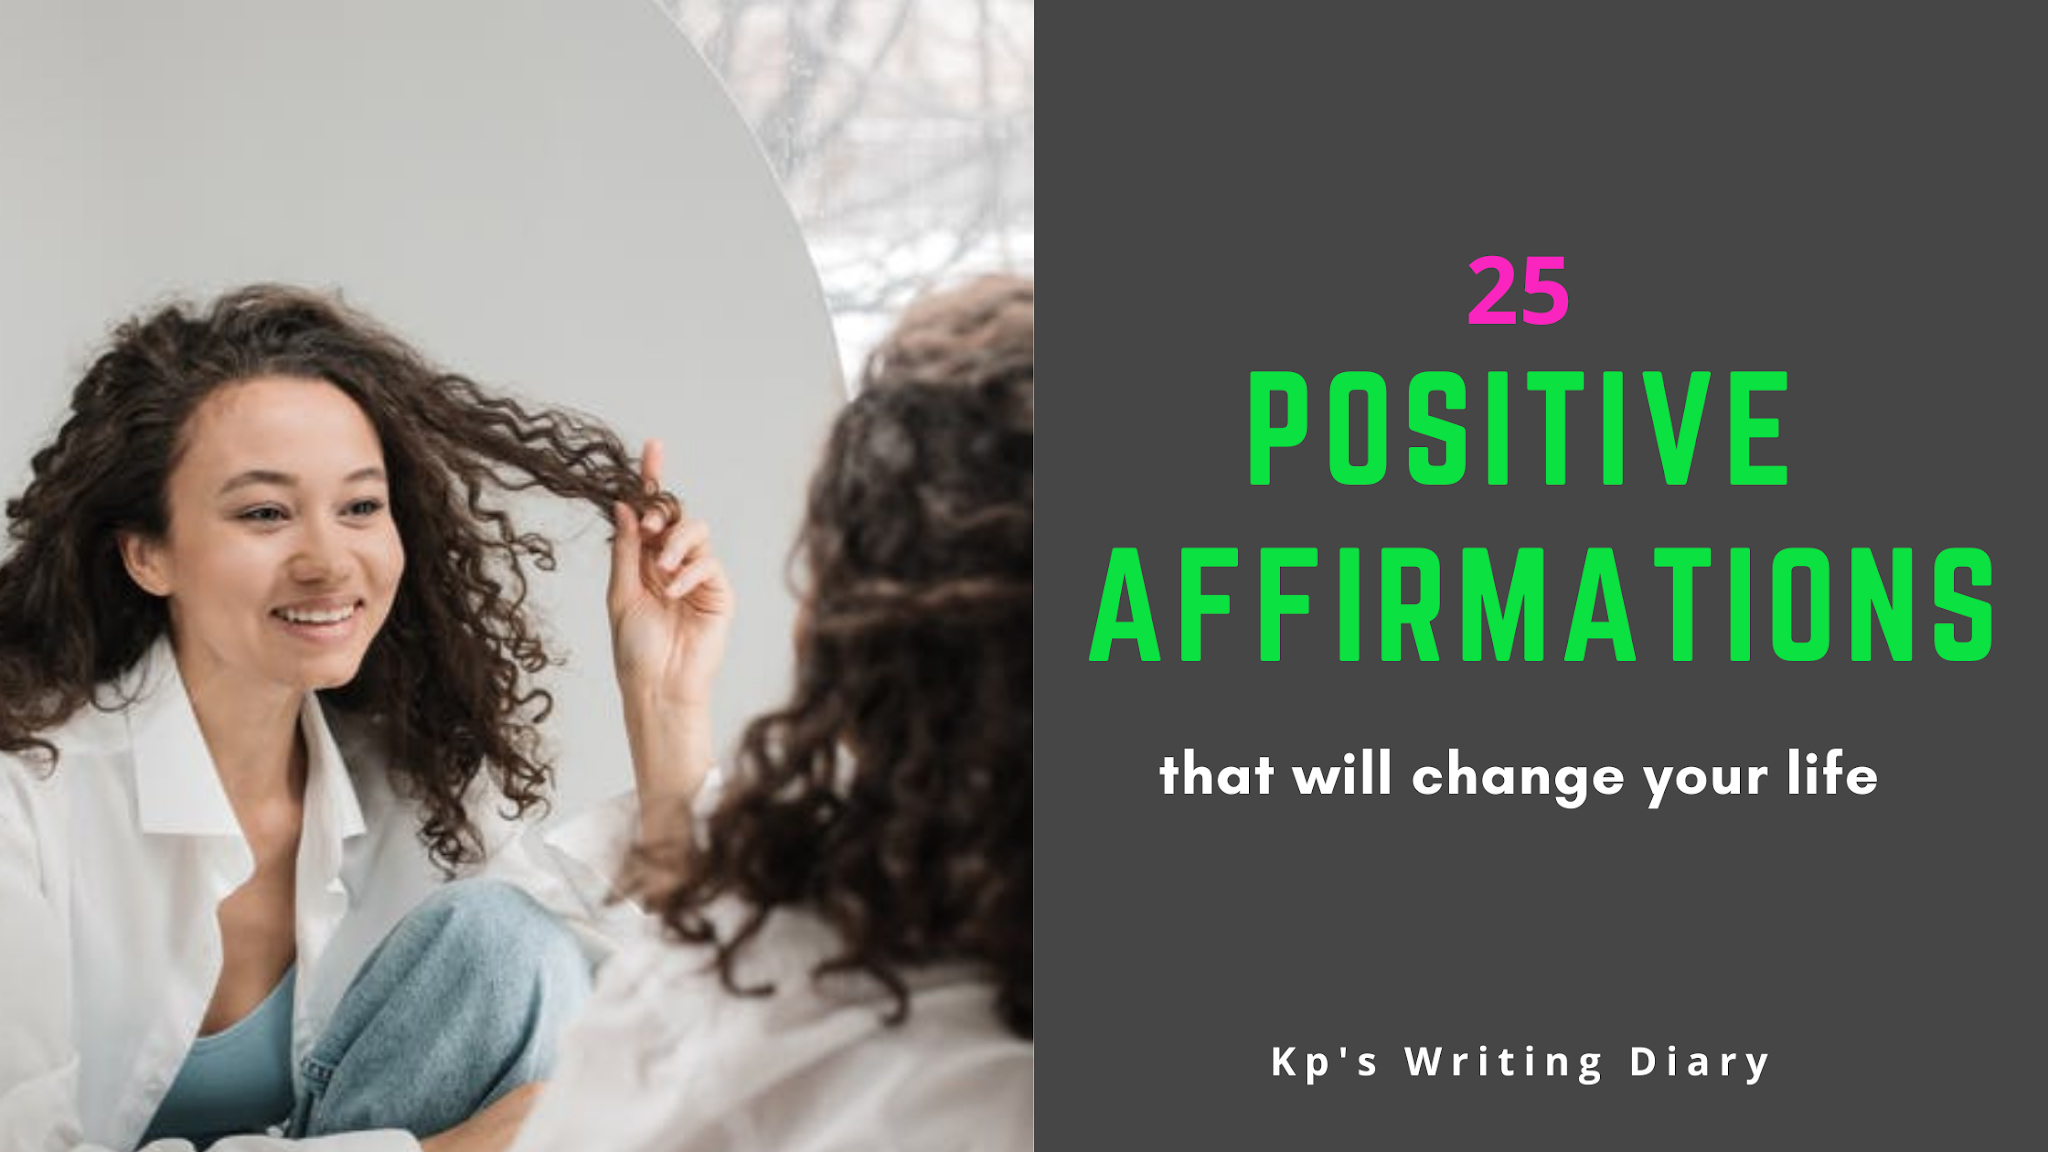 25 Powerful Affirmations That Will Change Your Life.